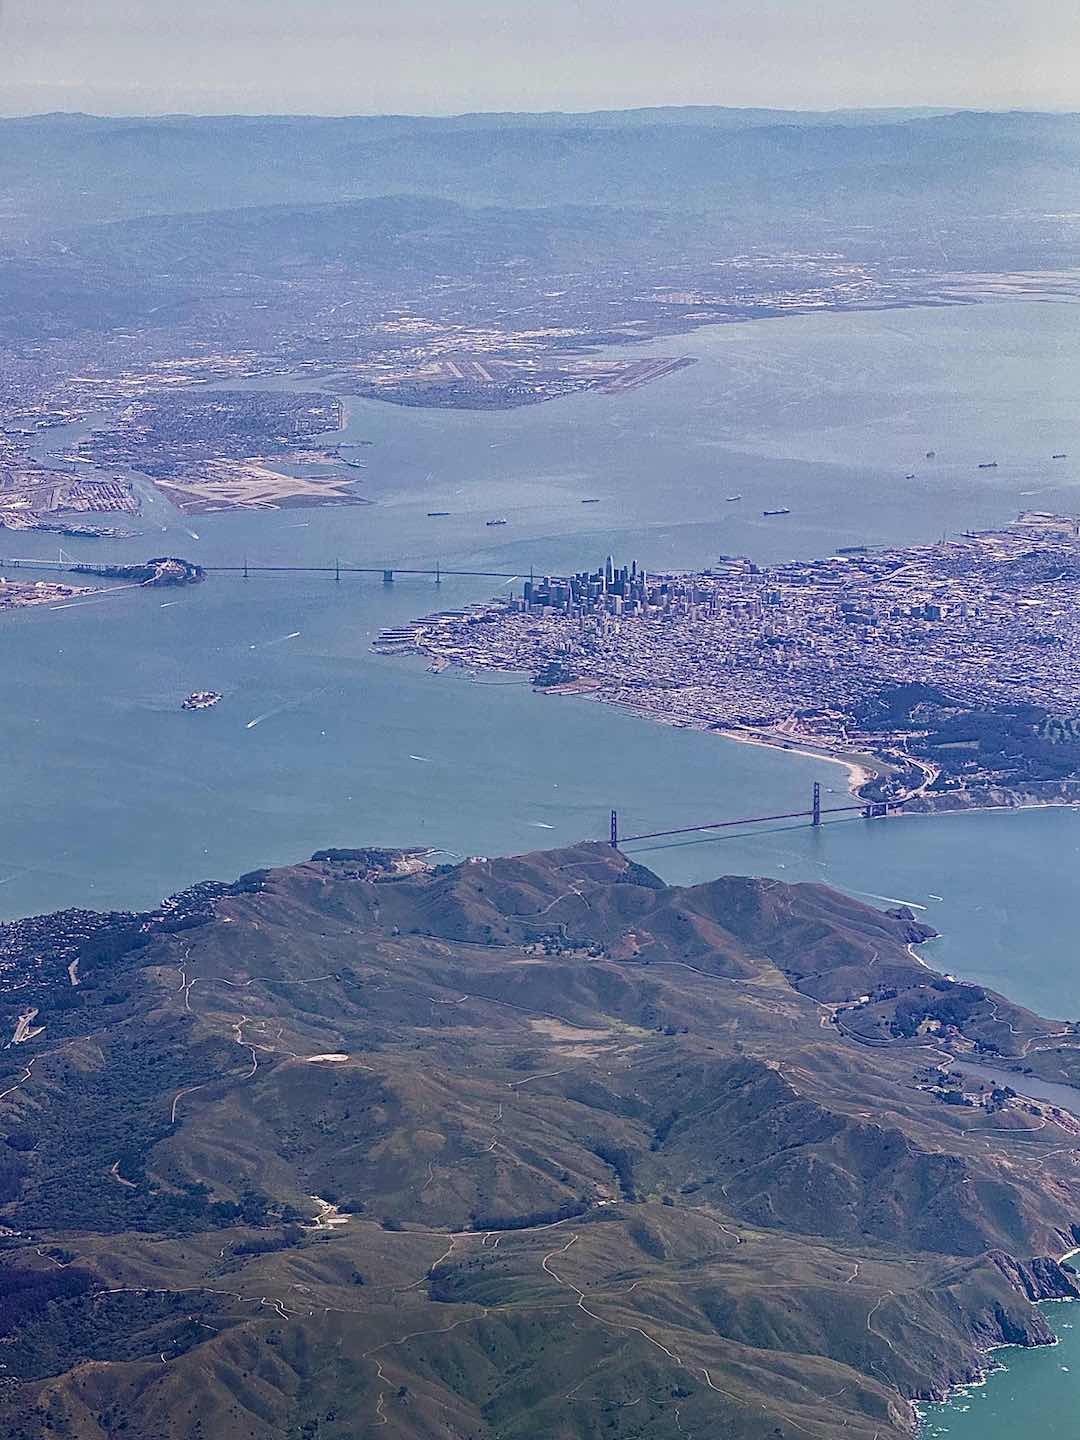 On final approach over San Francisco (Credit: me)